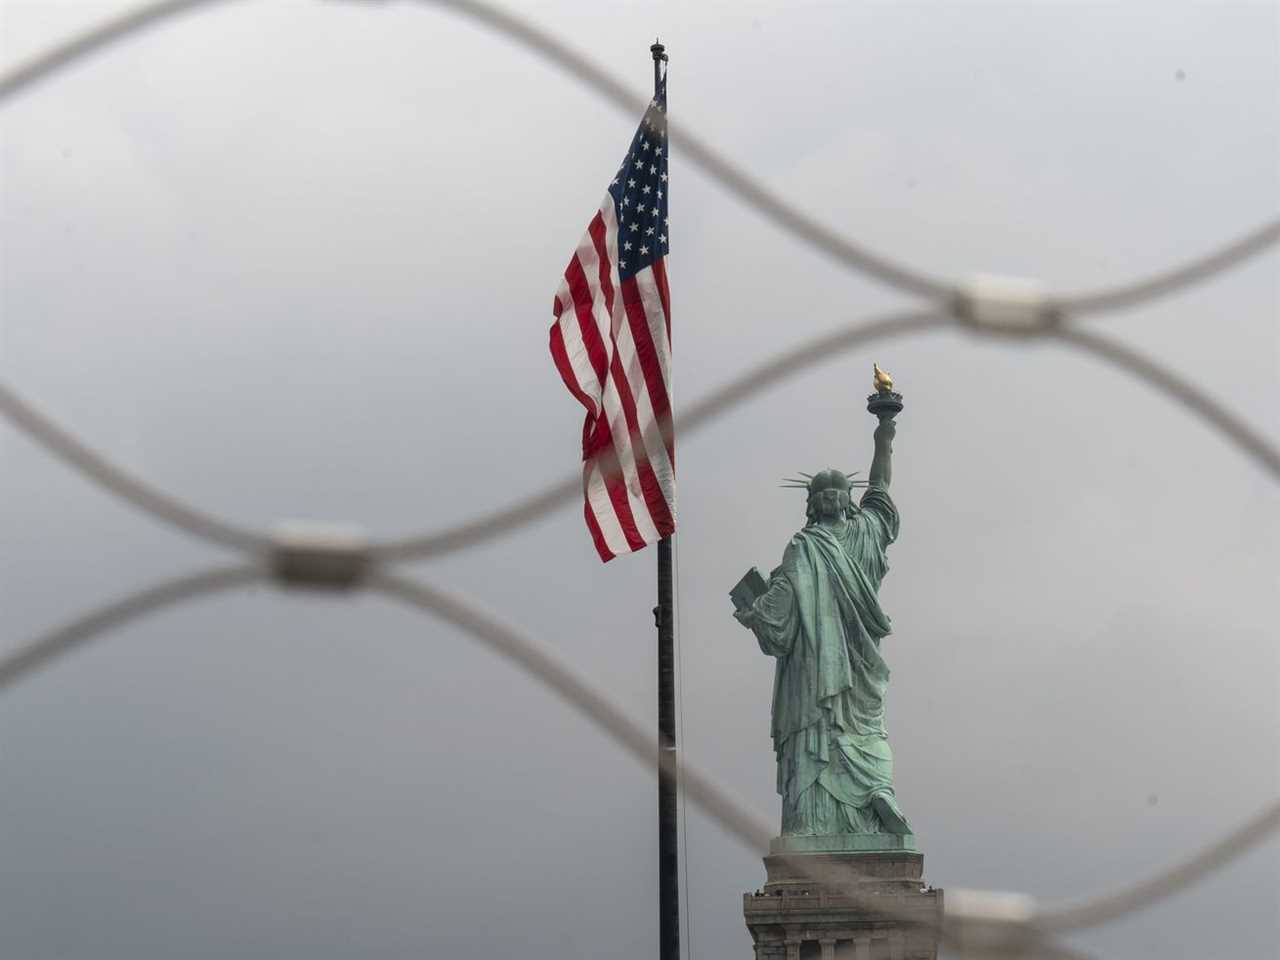 The Statue of Liberty and an American flag, photographed through wire fencing.